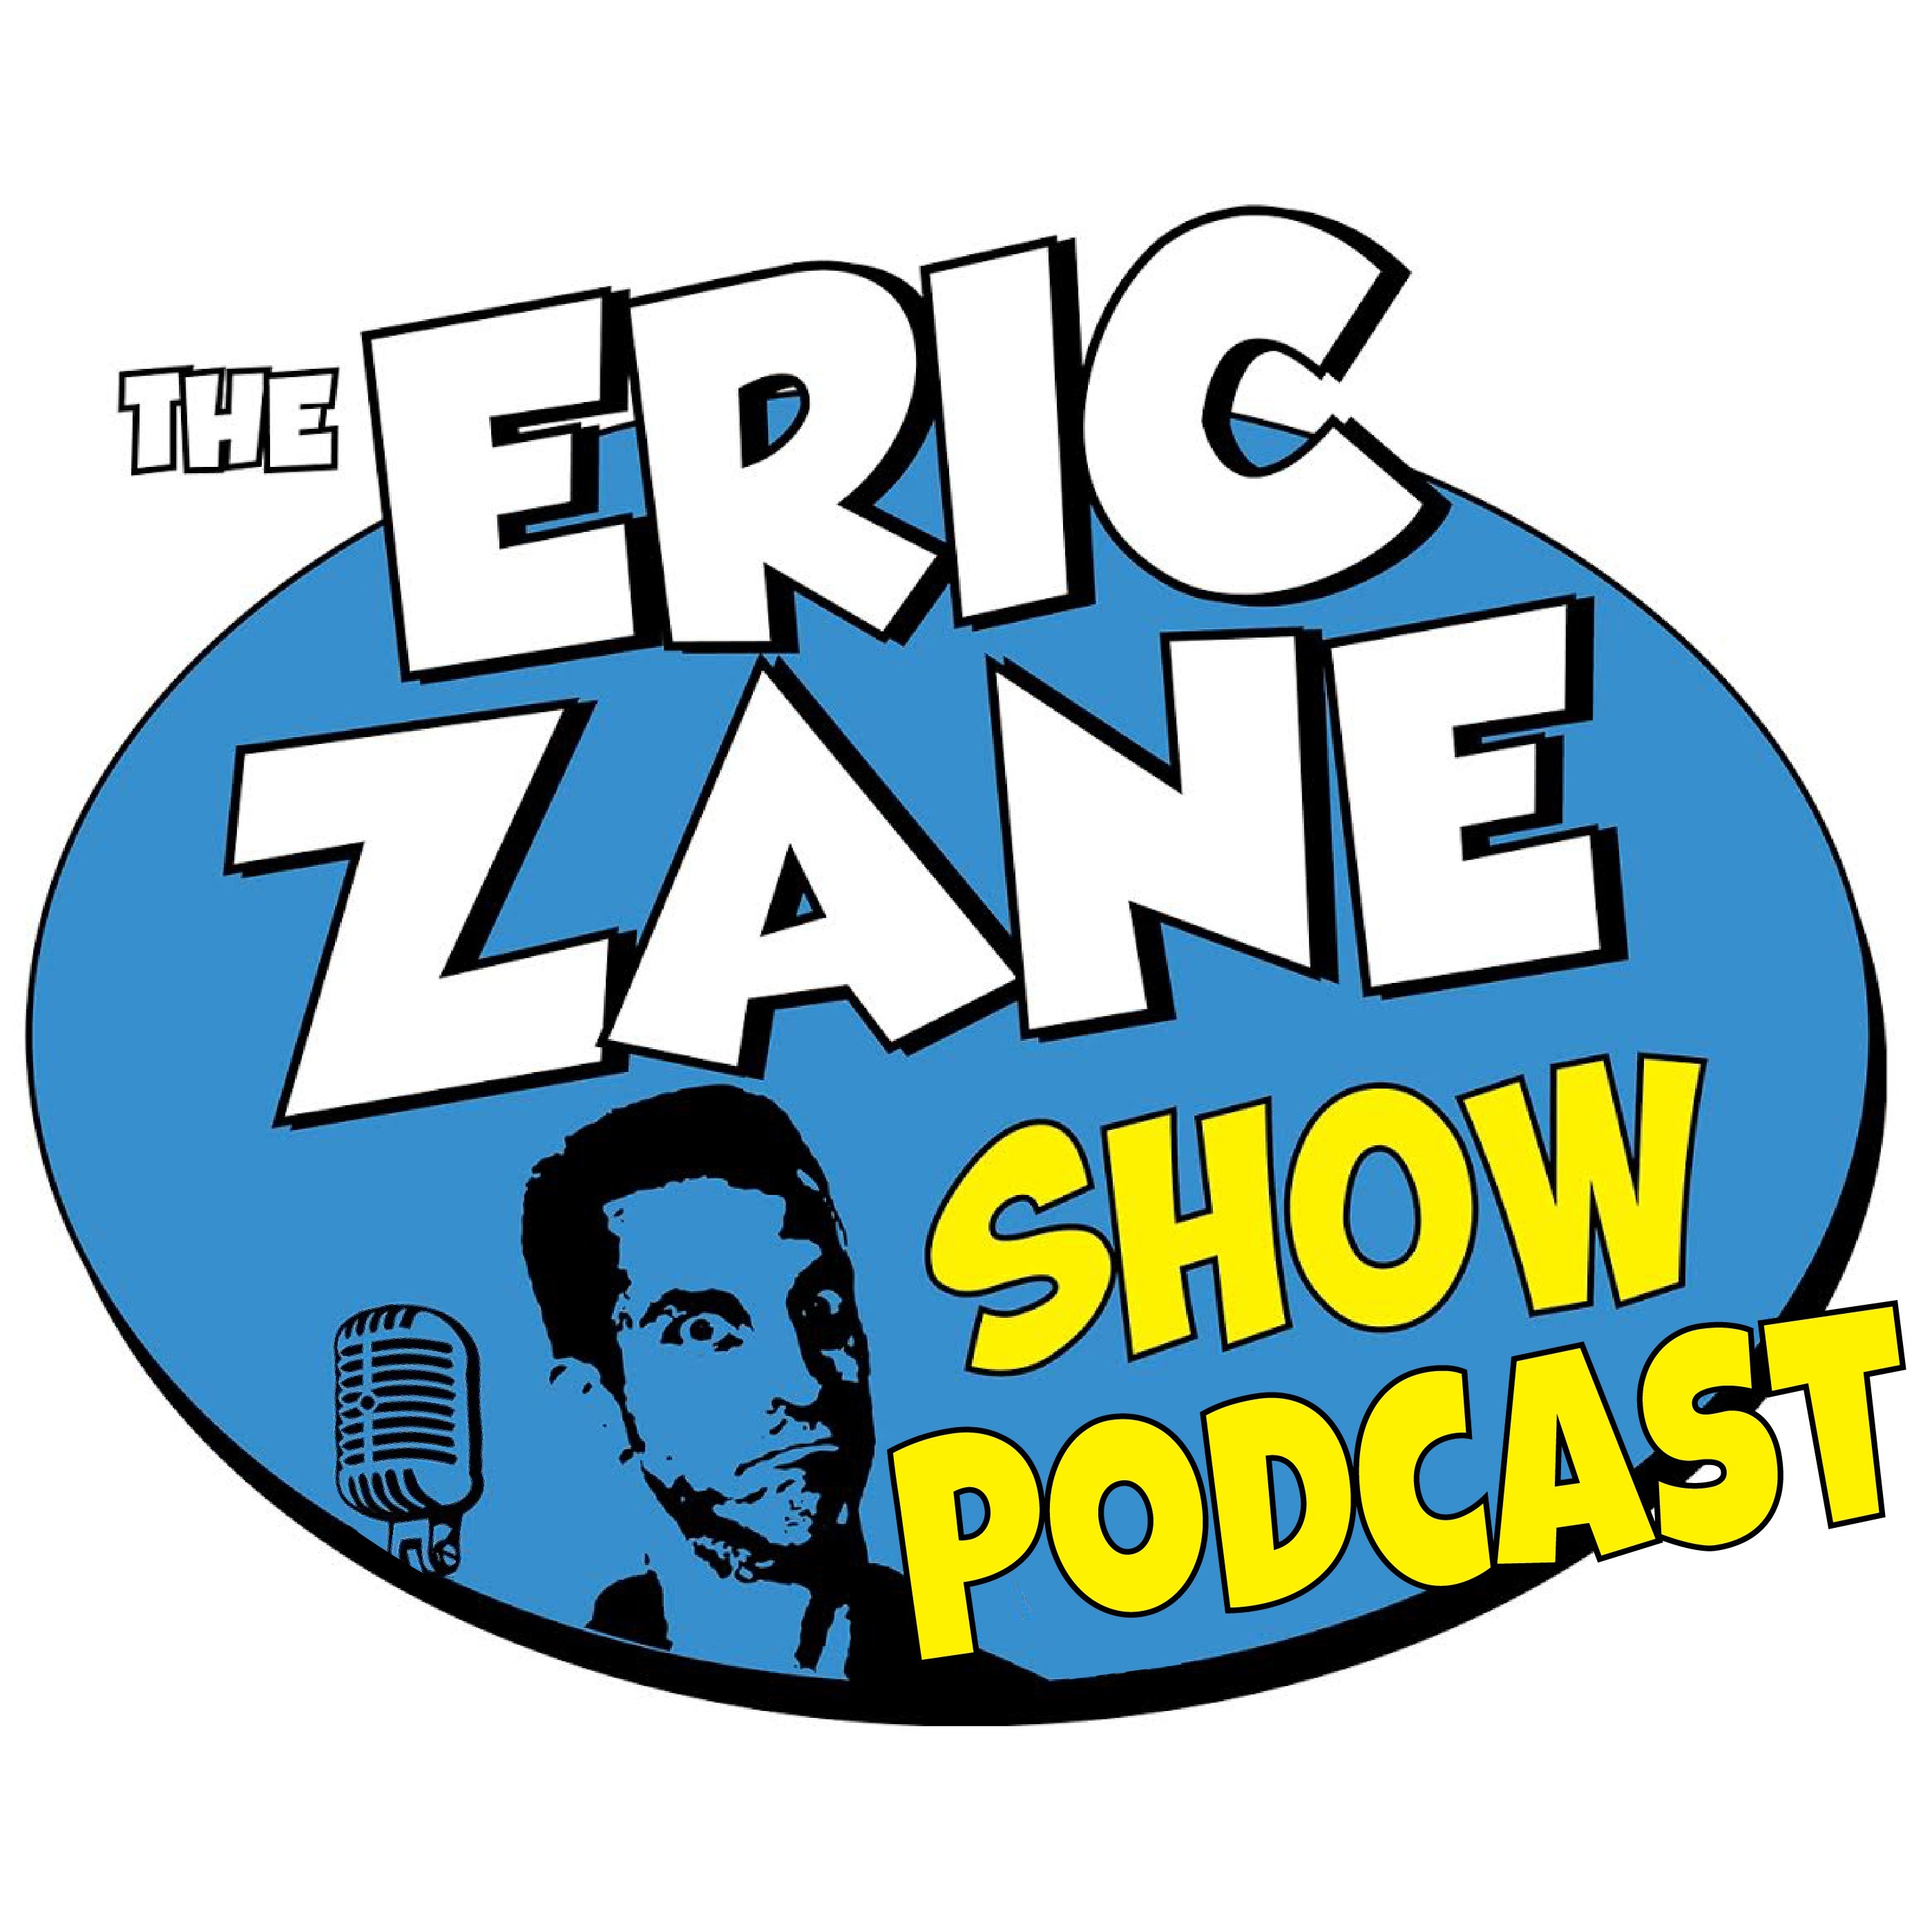 Eric Zane Show Podcast 949 - It's official...the wedding was a super spreader